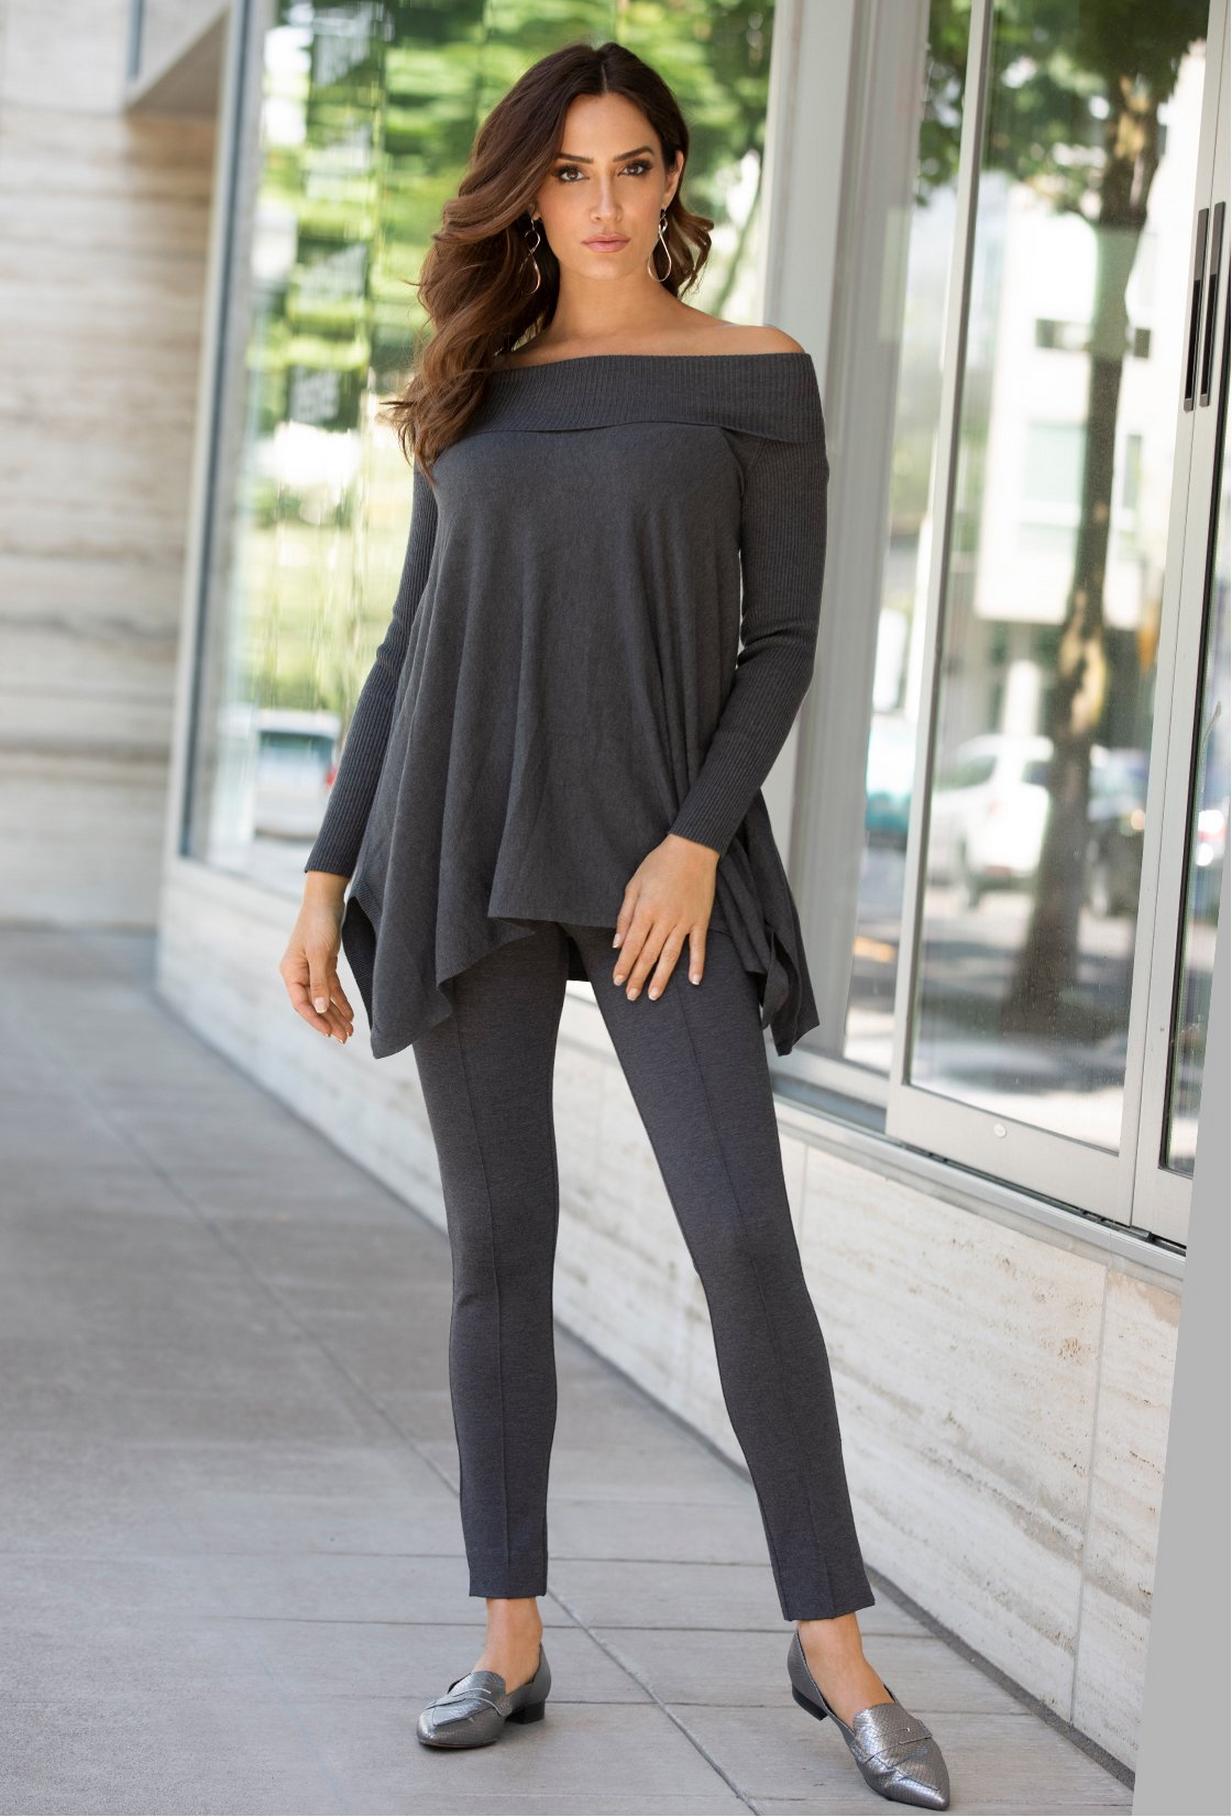 off the shoulder gray top with grey ponte leggings